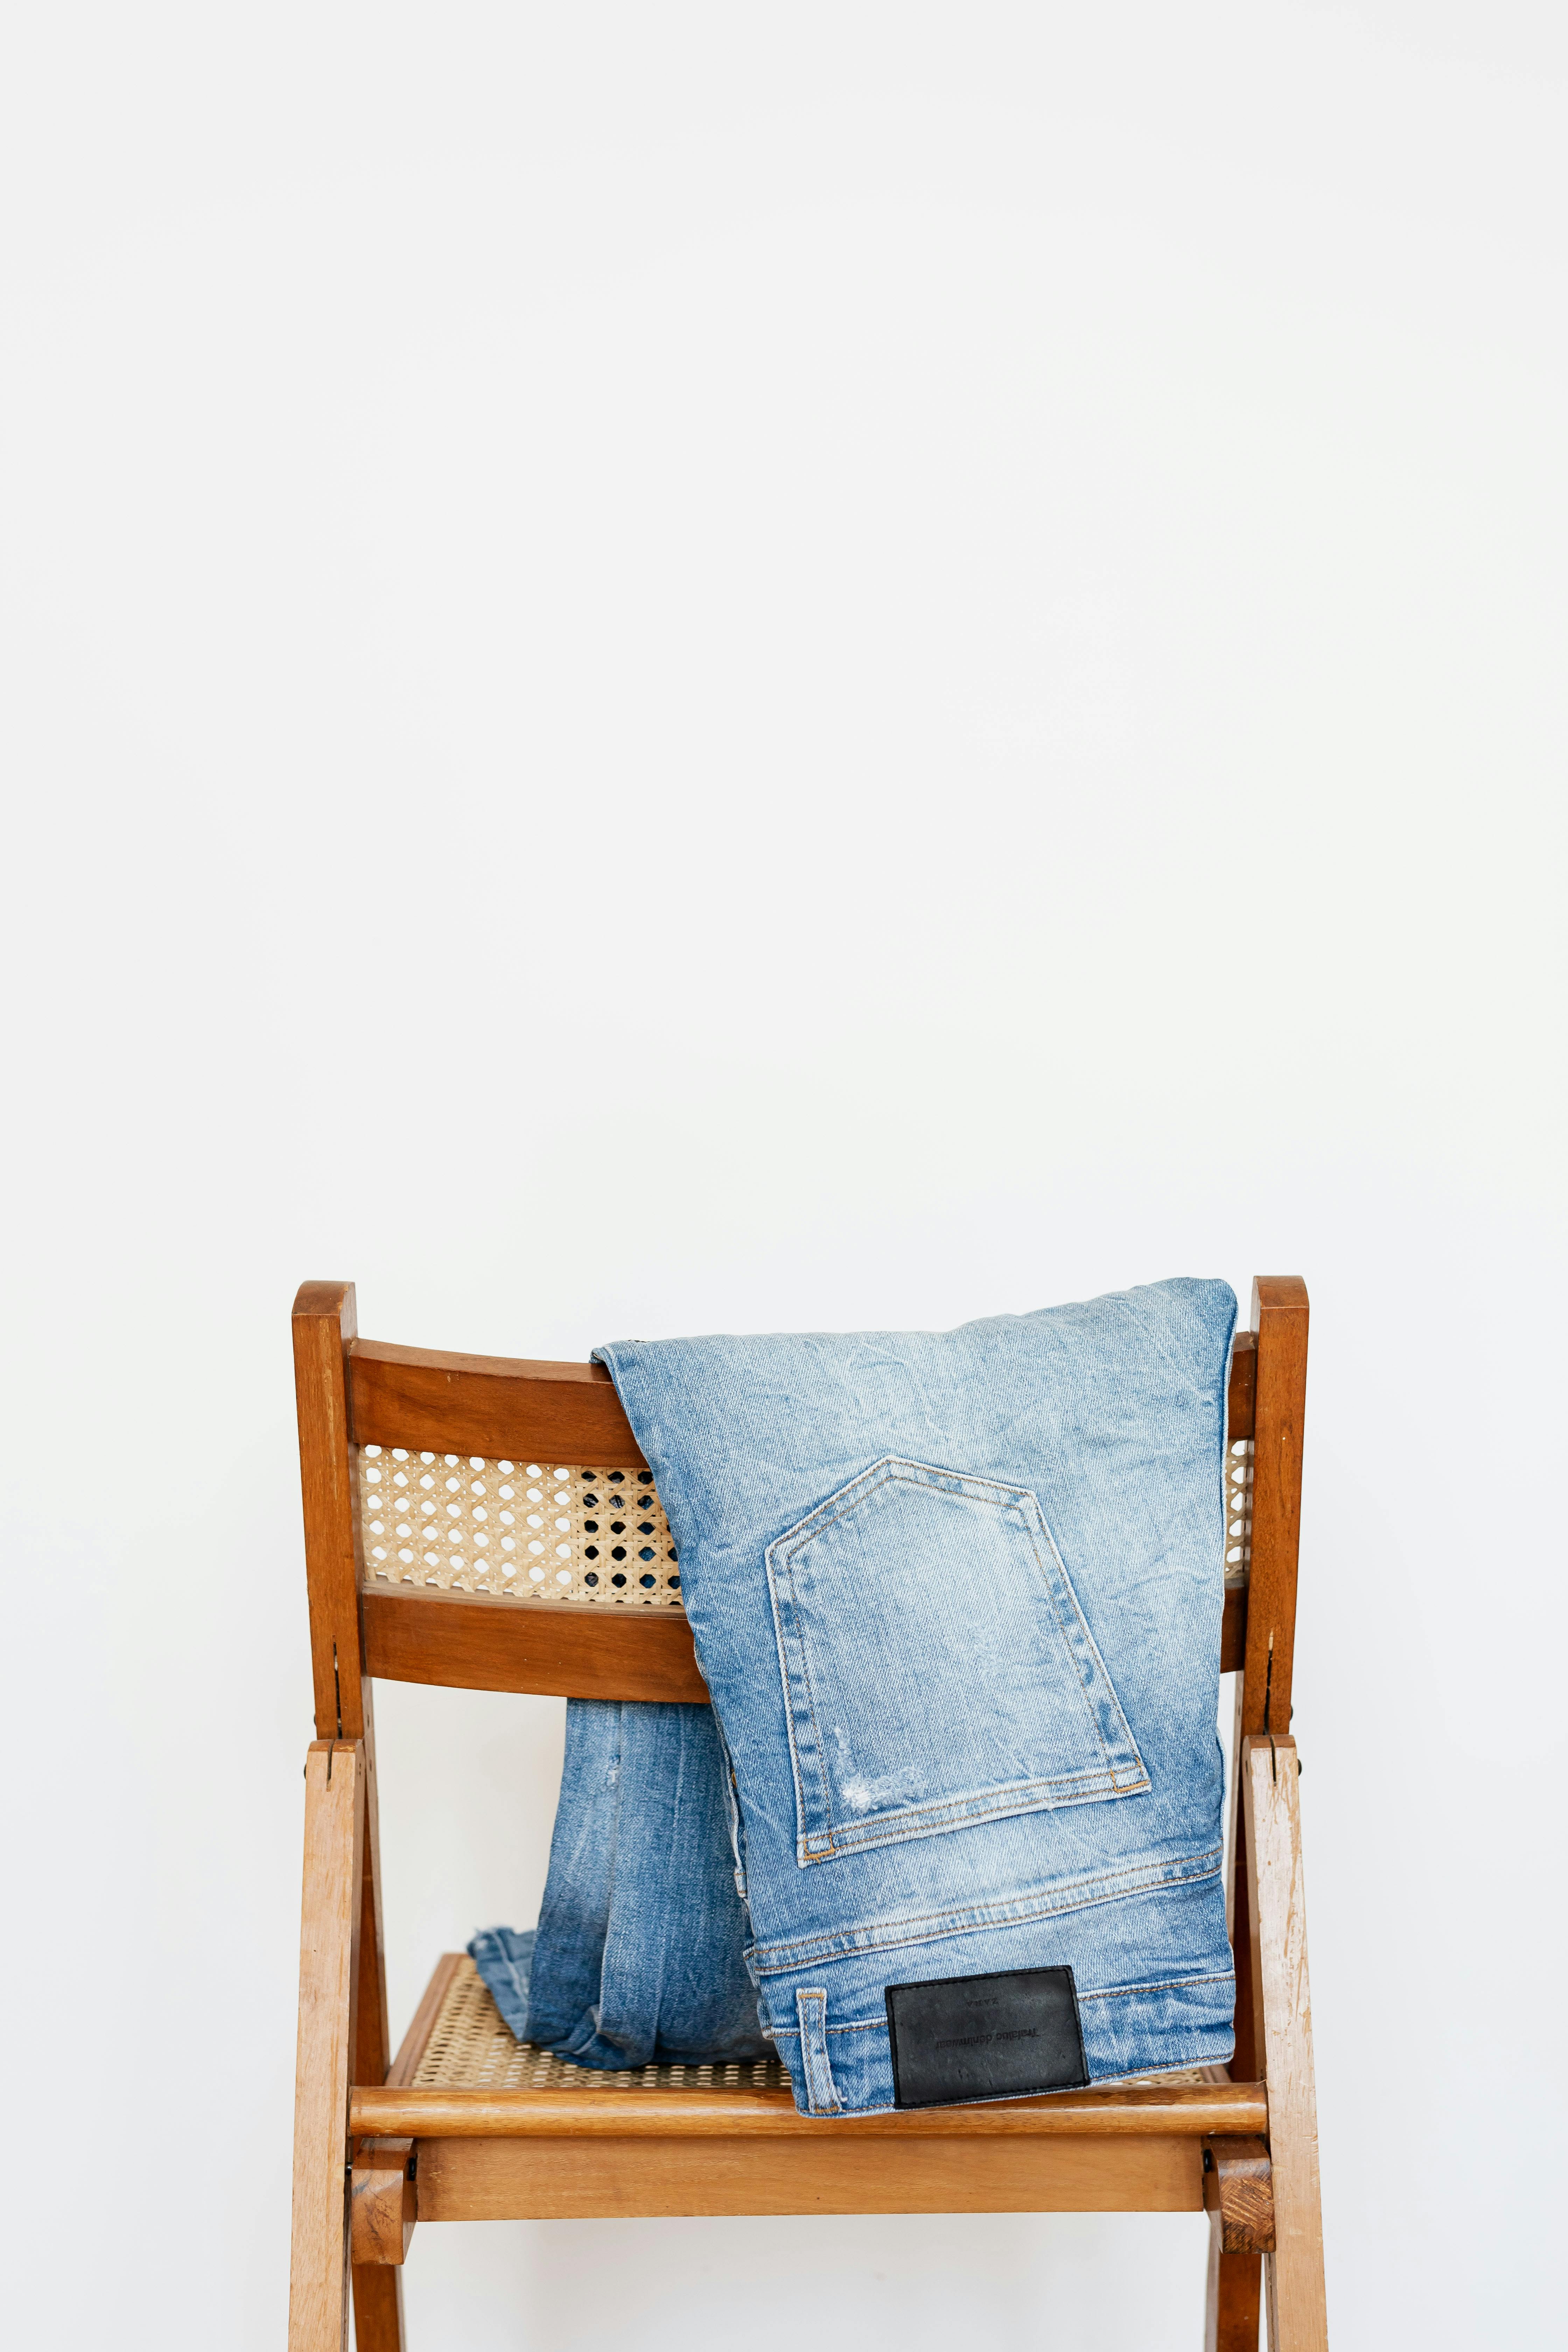 A pair of jeans hanging on a chair | Source: Pexels